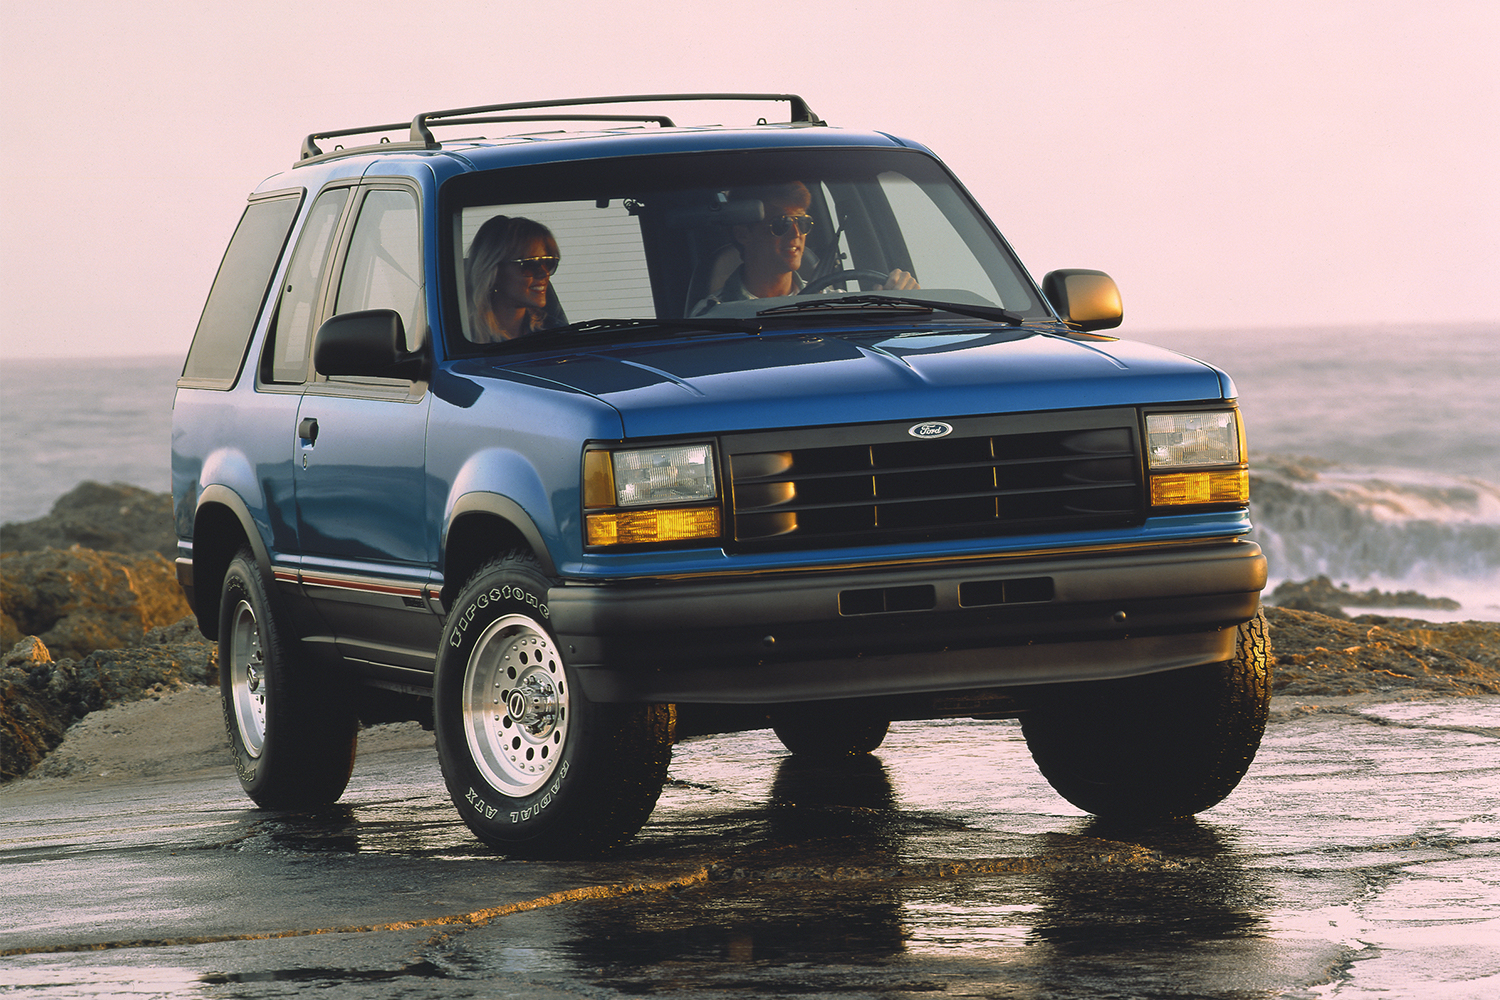 A man driving a 1992 blue Ford Explorer SUV near the ocean in a vintage photo